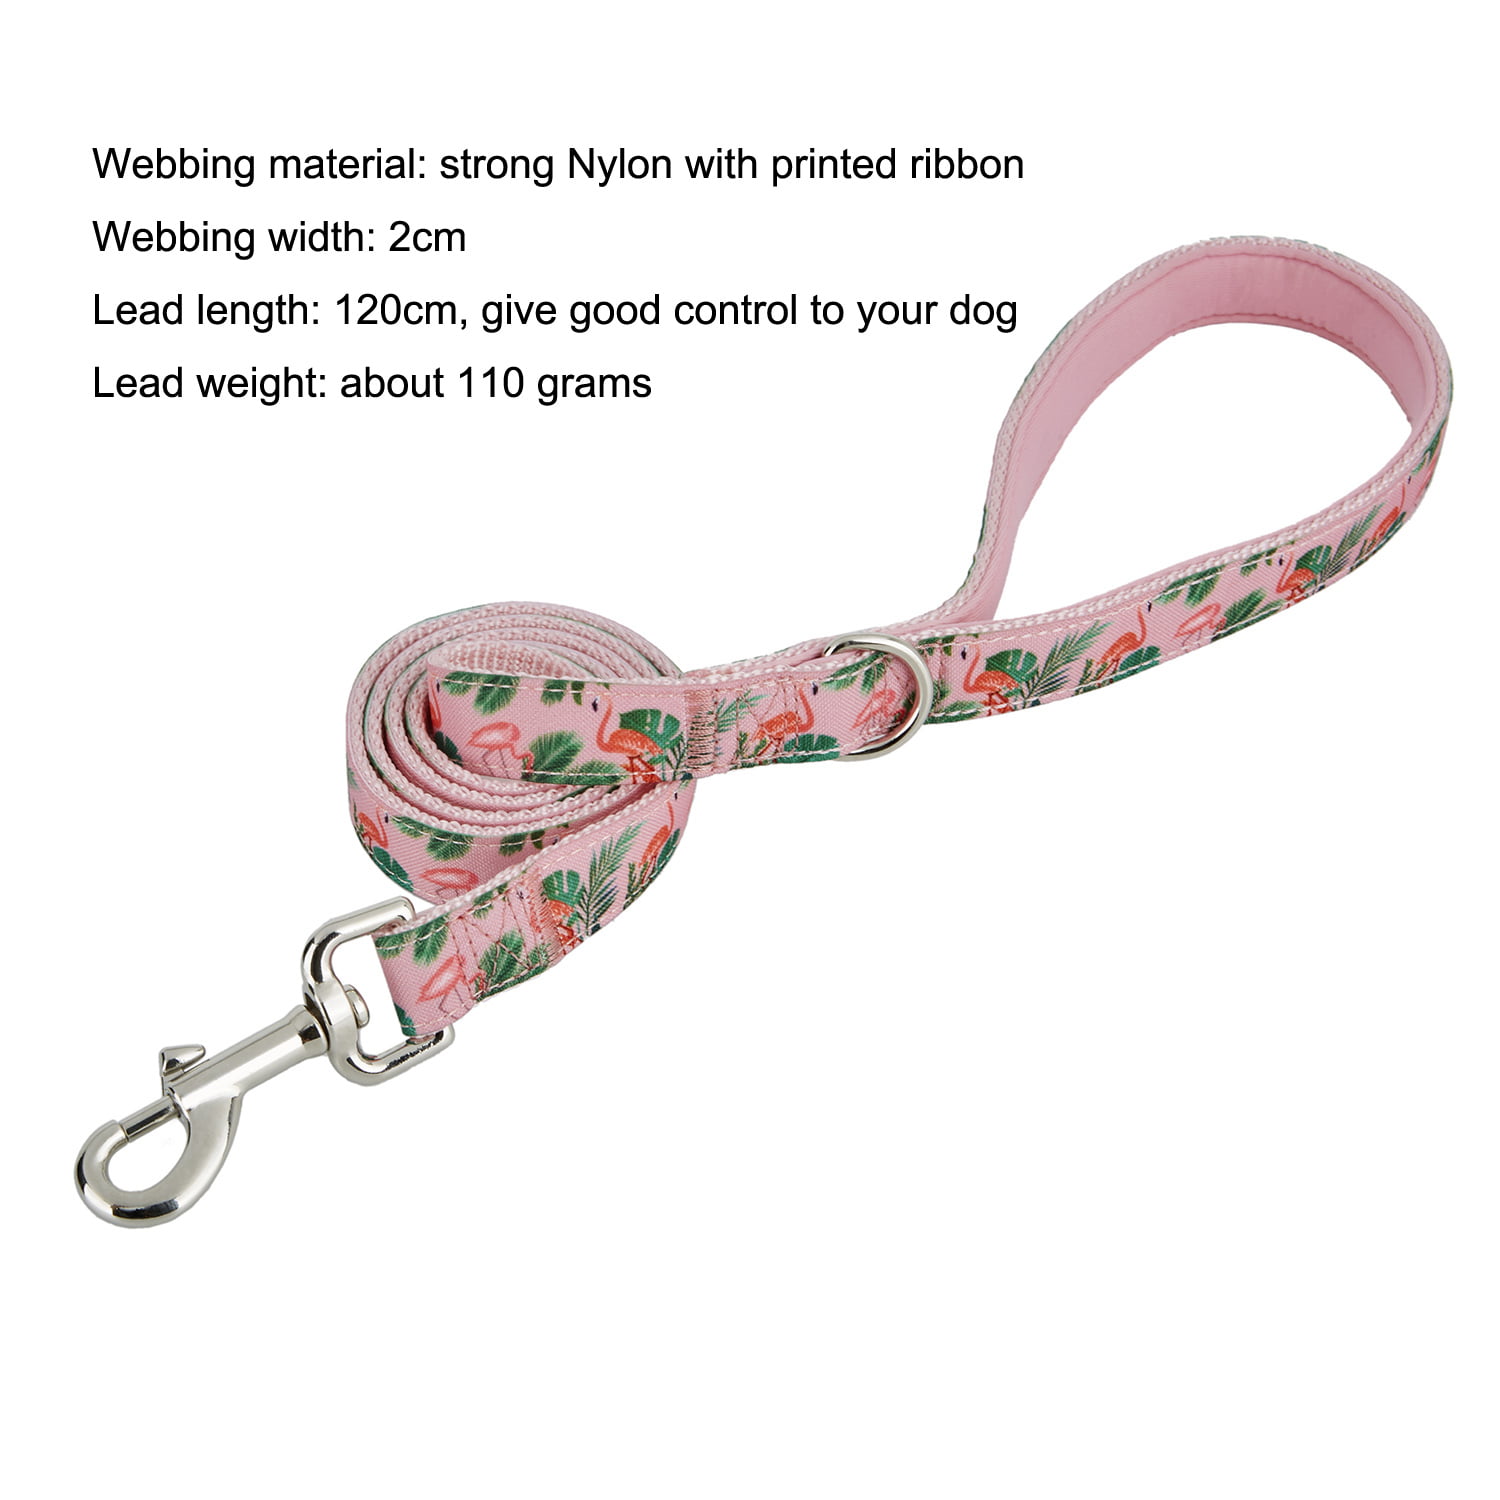 YUDOTE Basic Nylon Dog Lead Soft Strong Leash with Premium Flocking Fabric for Daily Walk with Small to Medium Sized Breeds,Brown Leopard Pattern